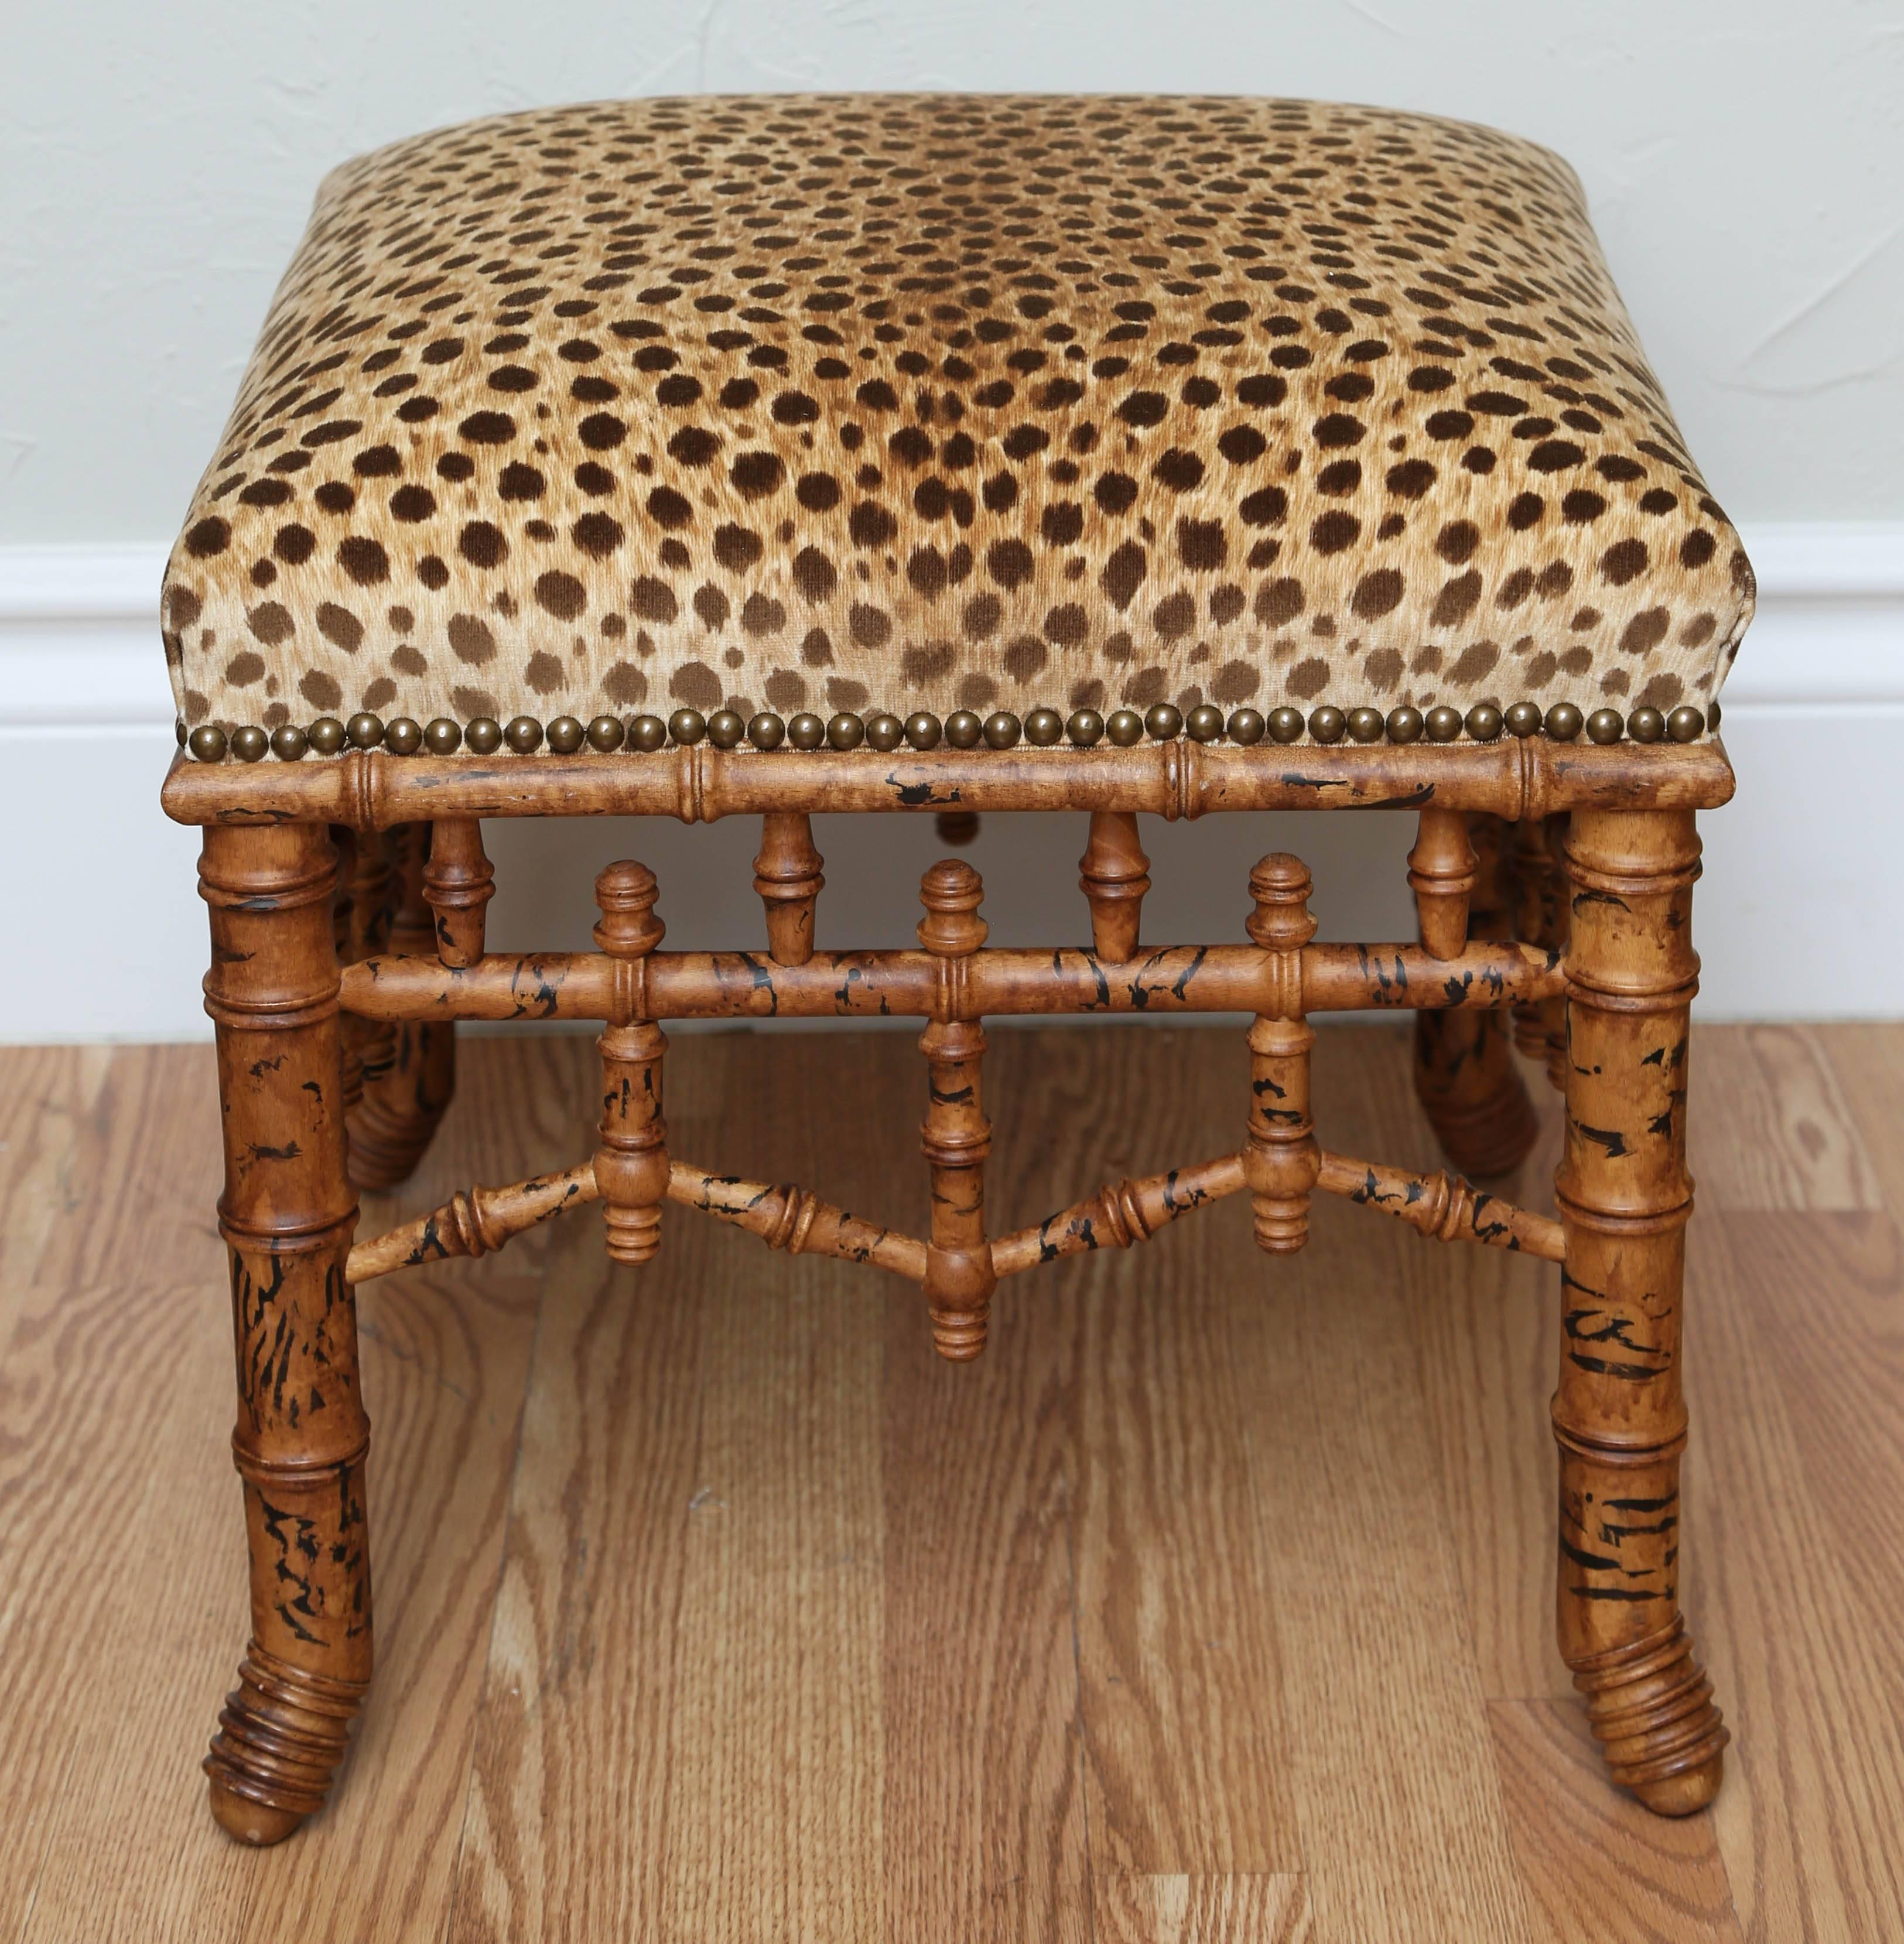 Charming faux bamboo wood bench with animal print velvet upholstery.